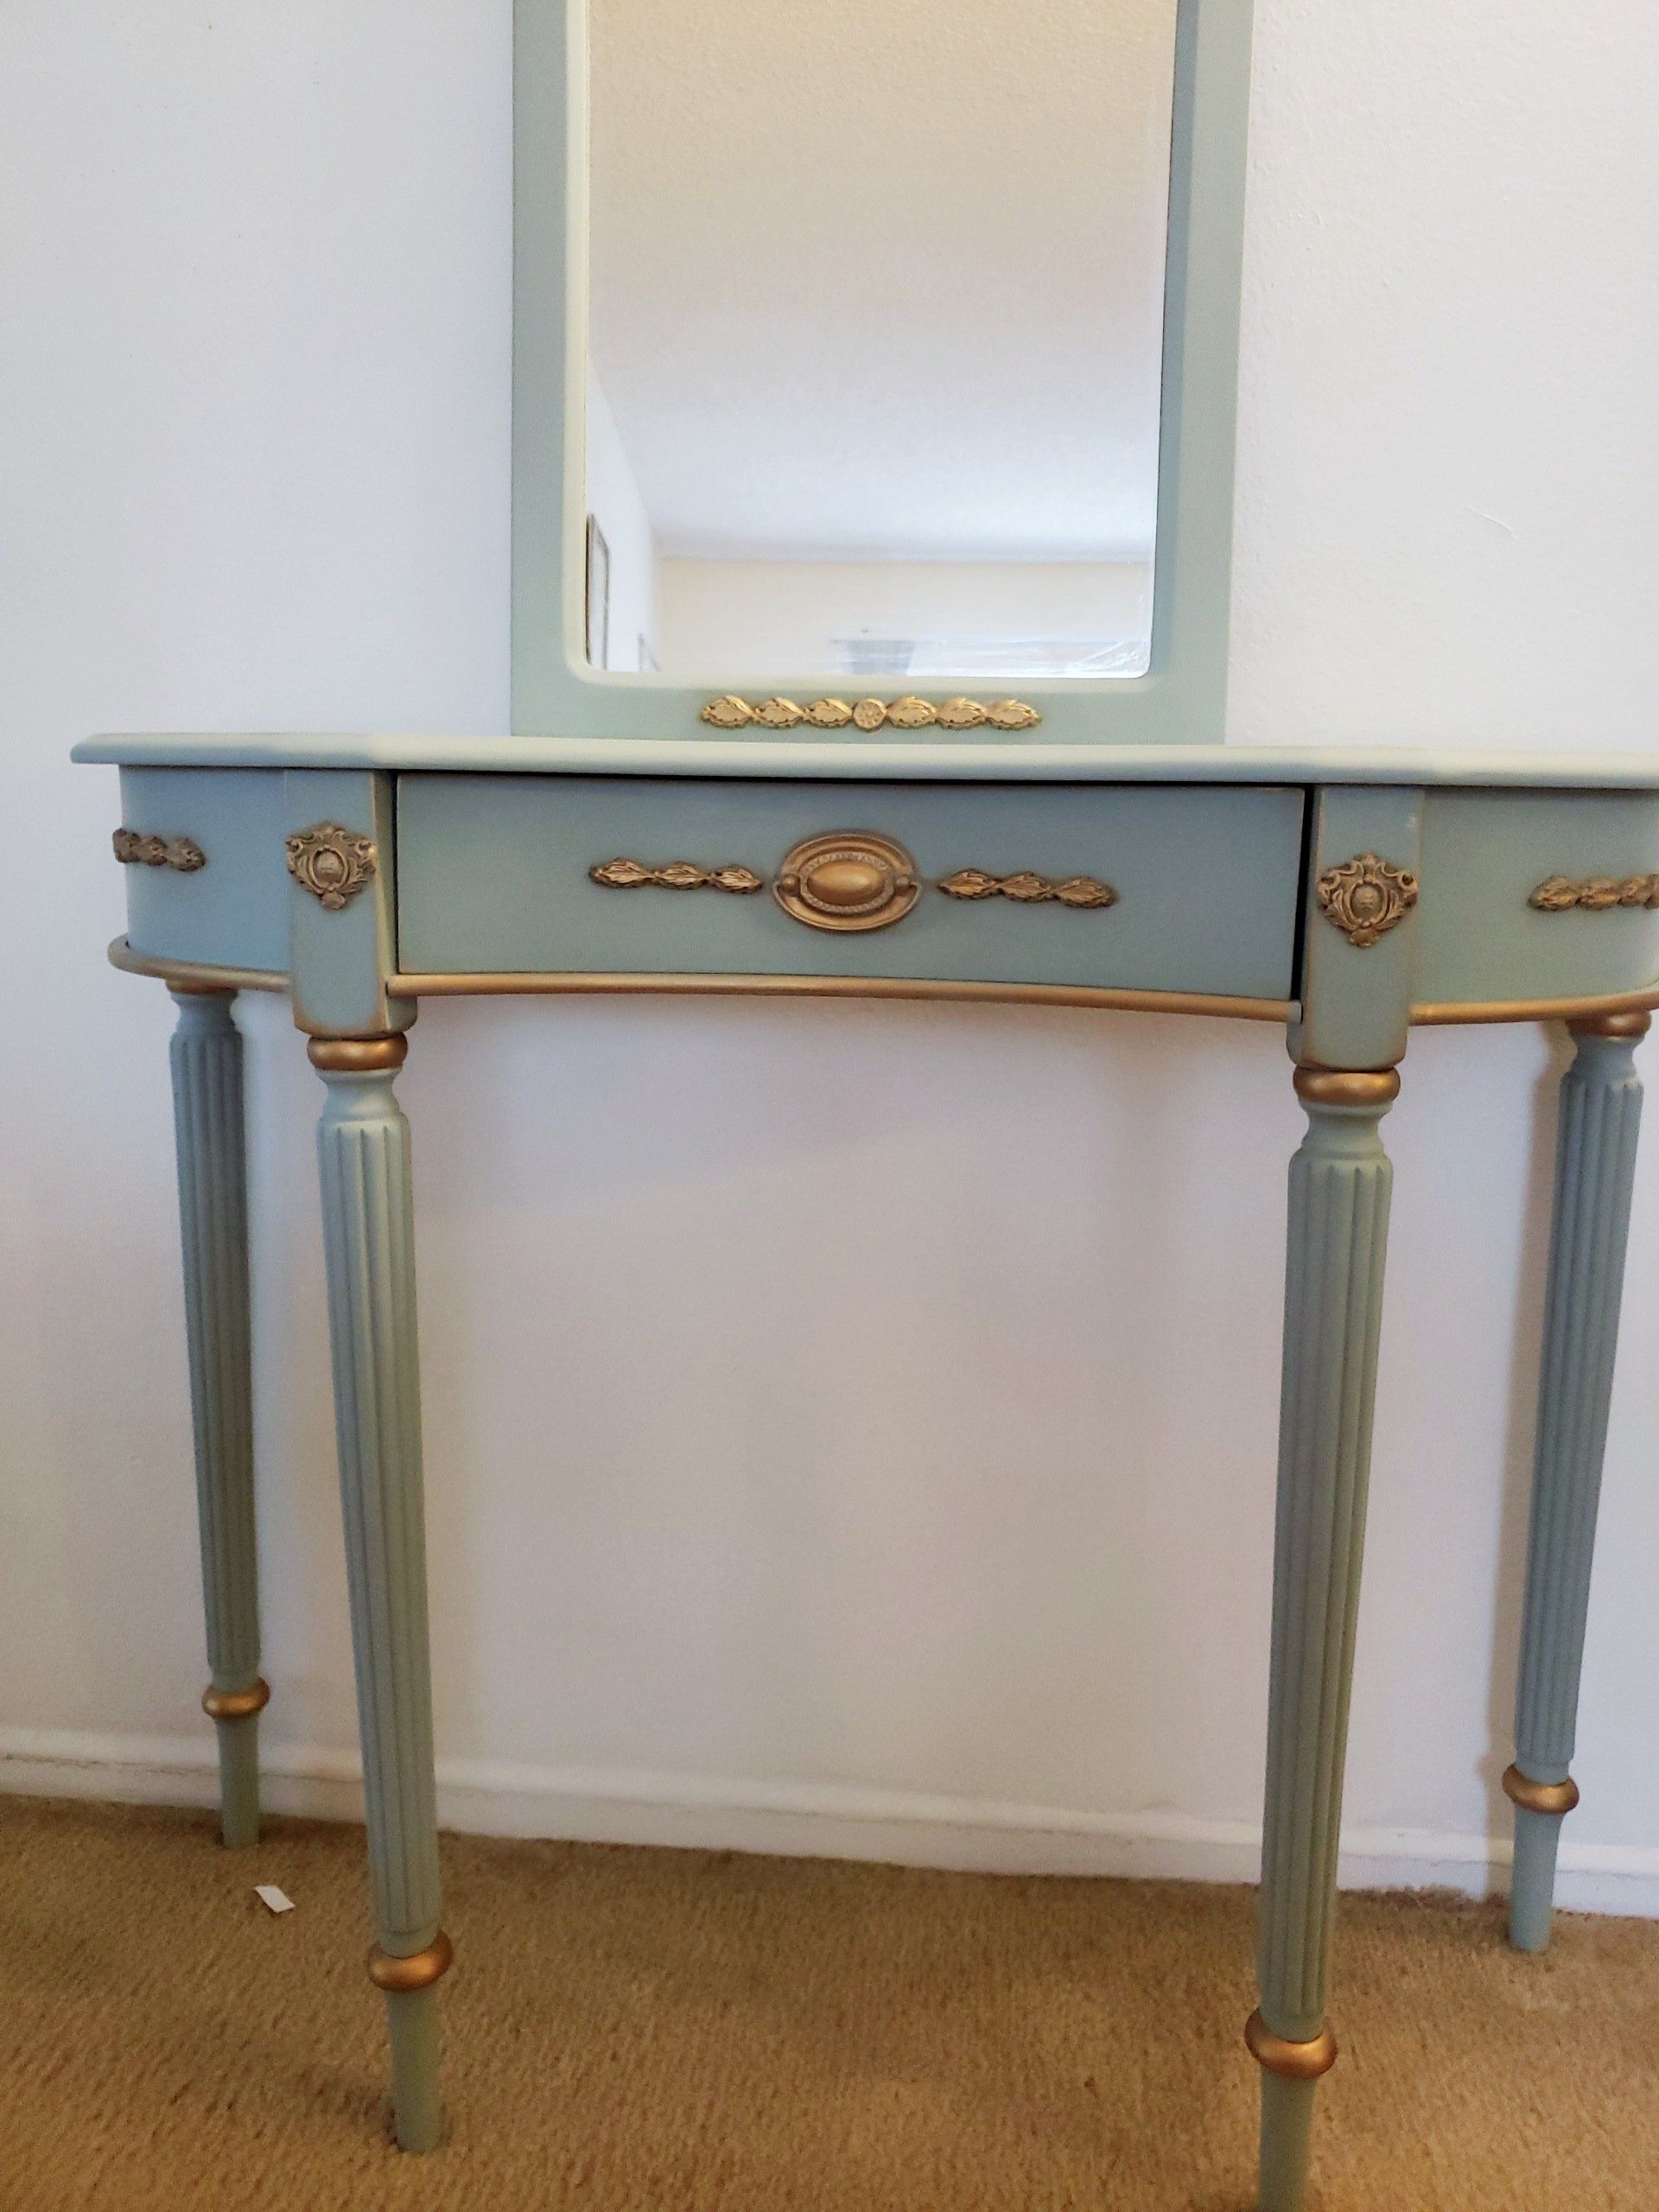 ShabbyChic entry way table or console